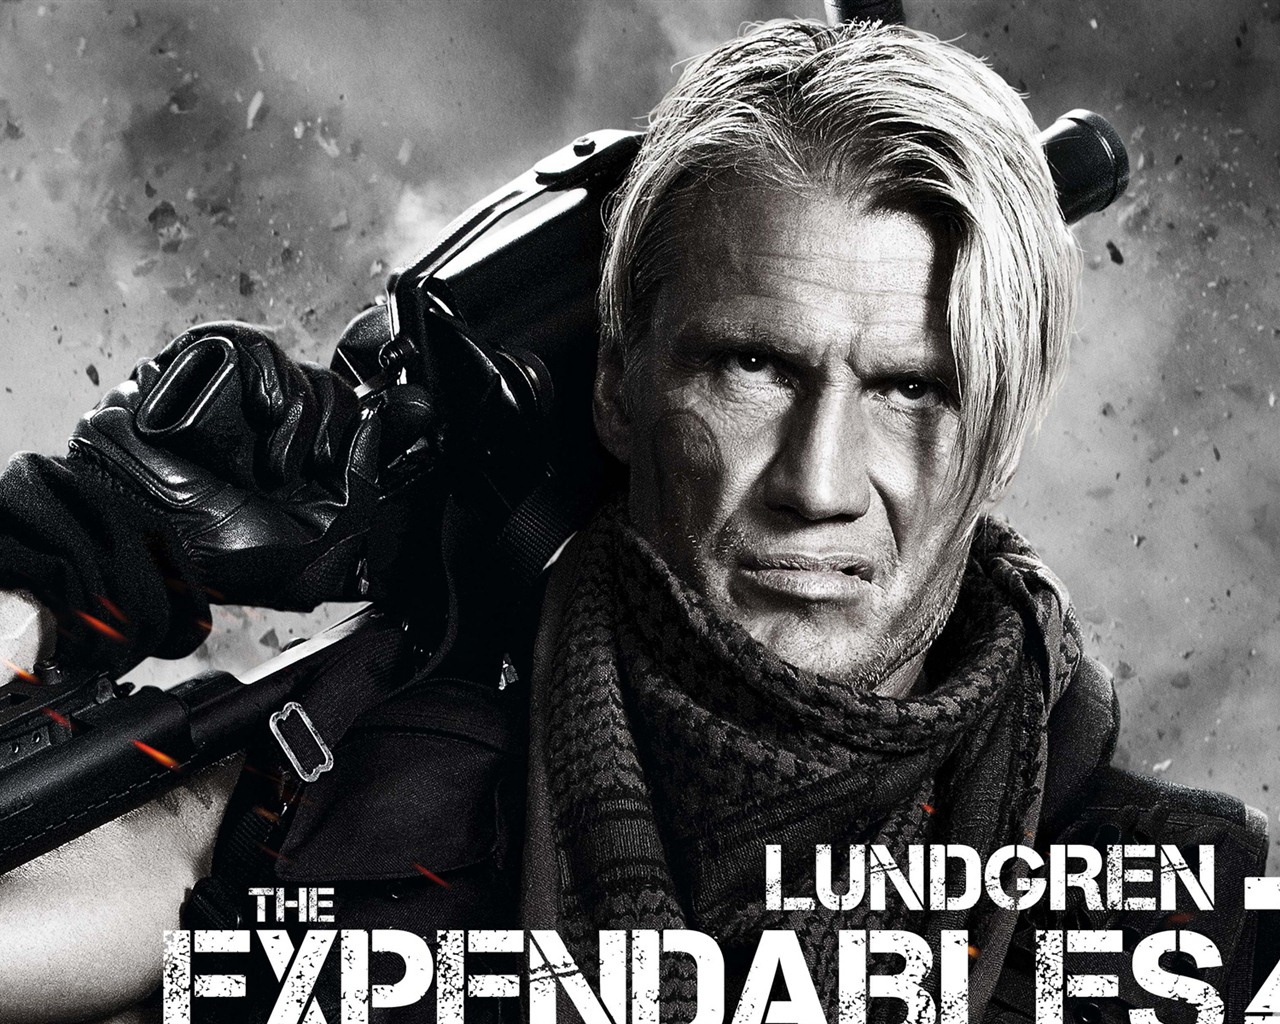 2012 The Expendables 2 敢死队2 高清壁纸3 - 1280x1024